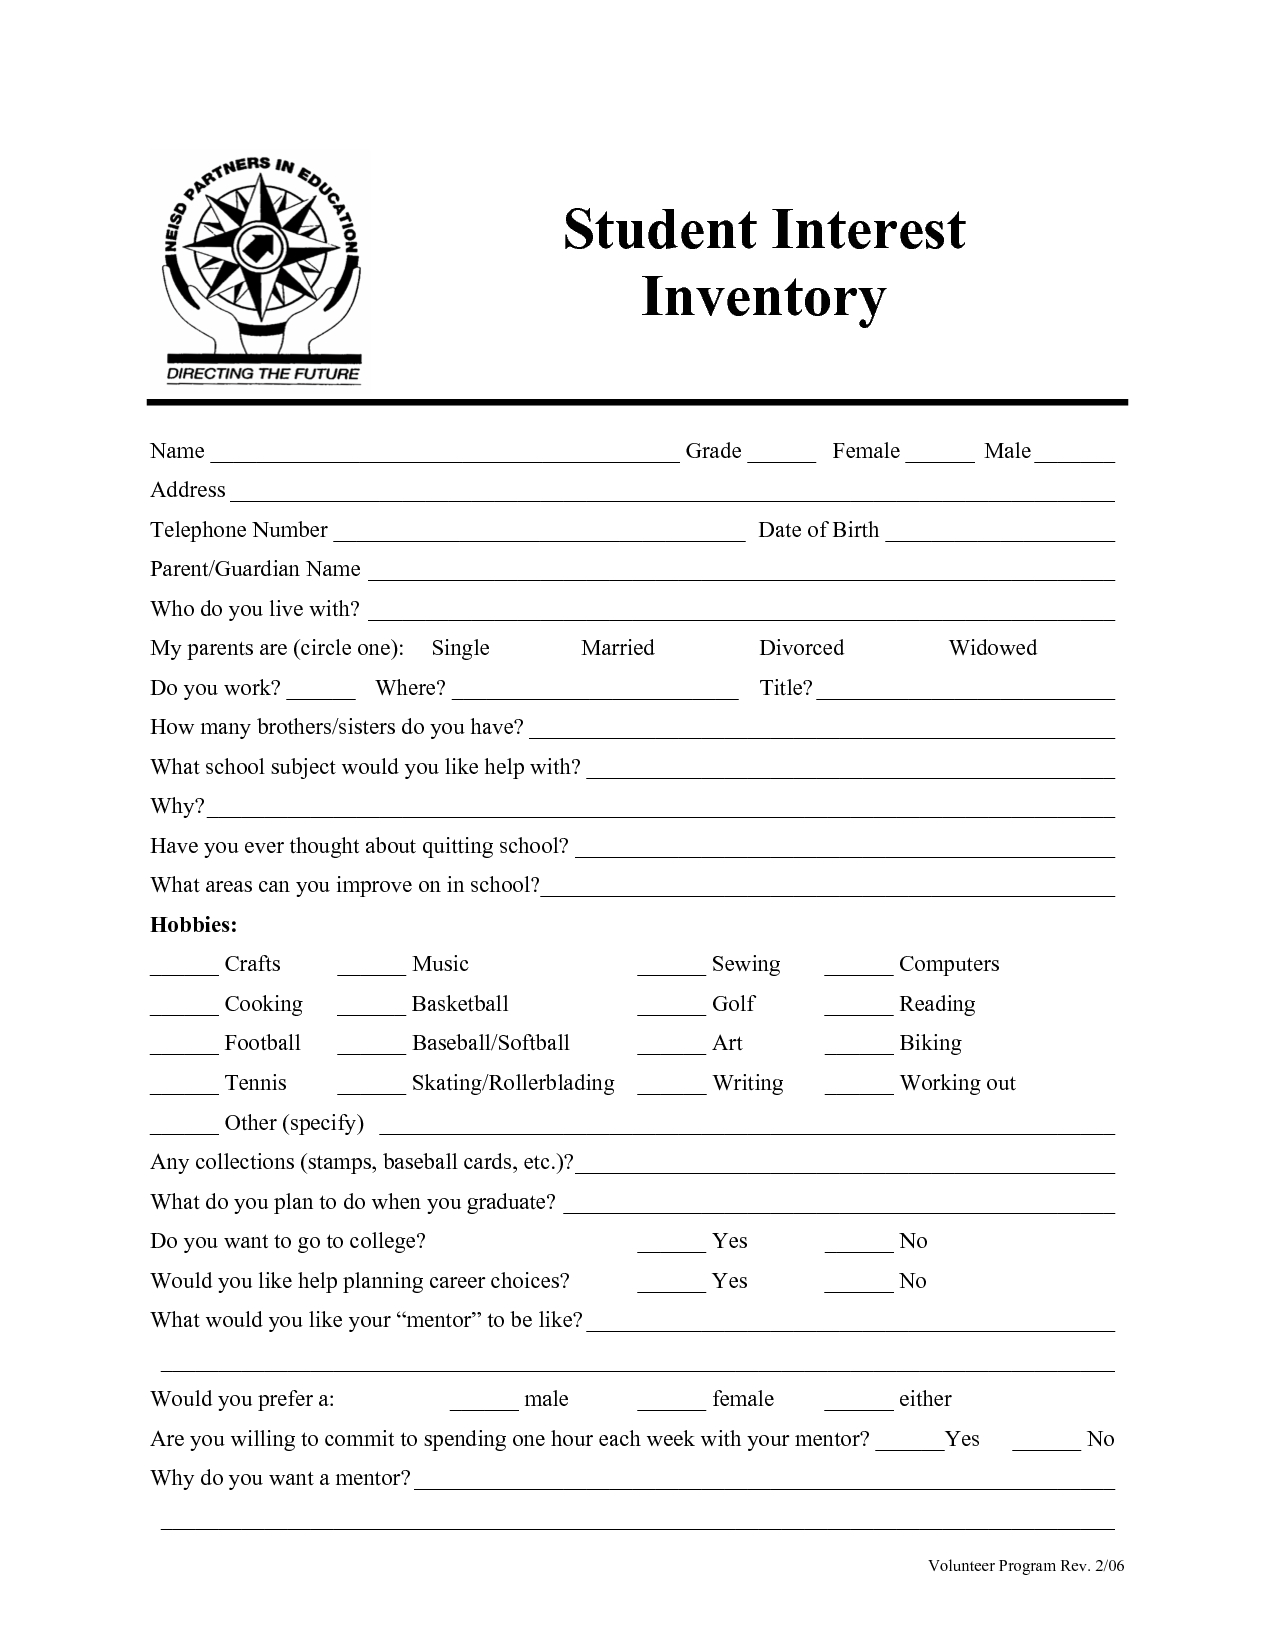 Interest Inventory For Students Printable (92  Images In Collection